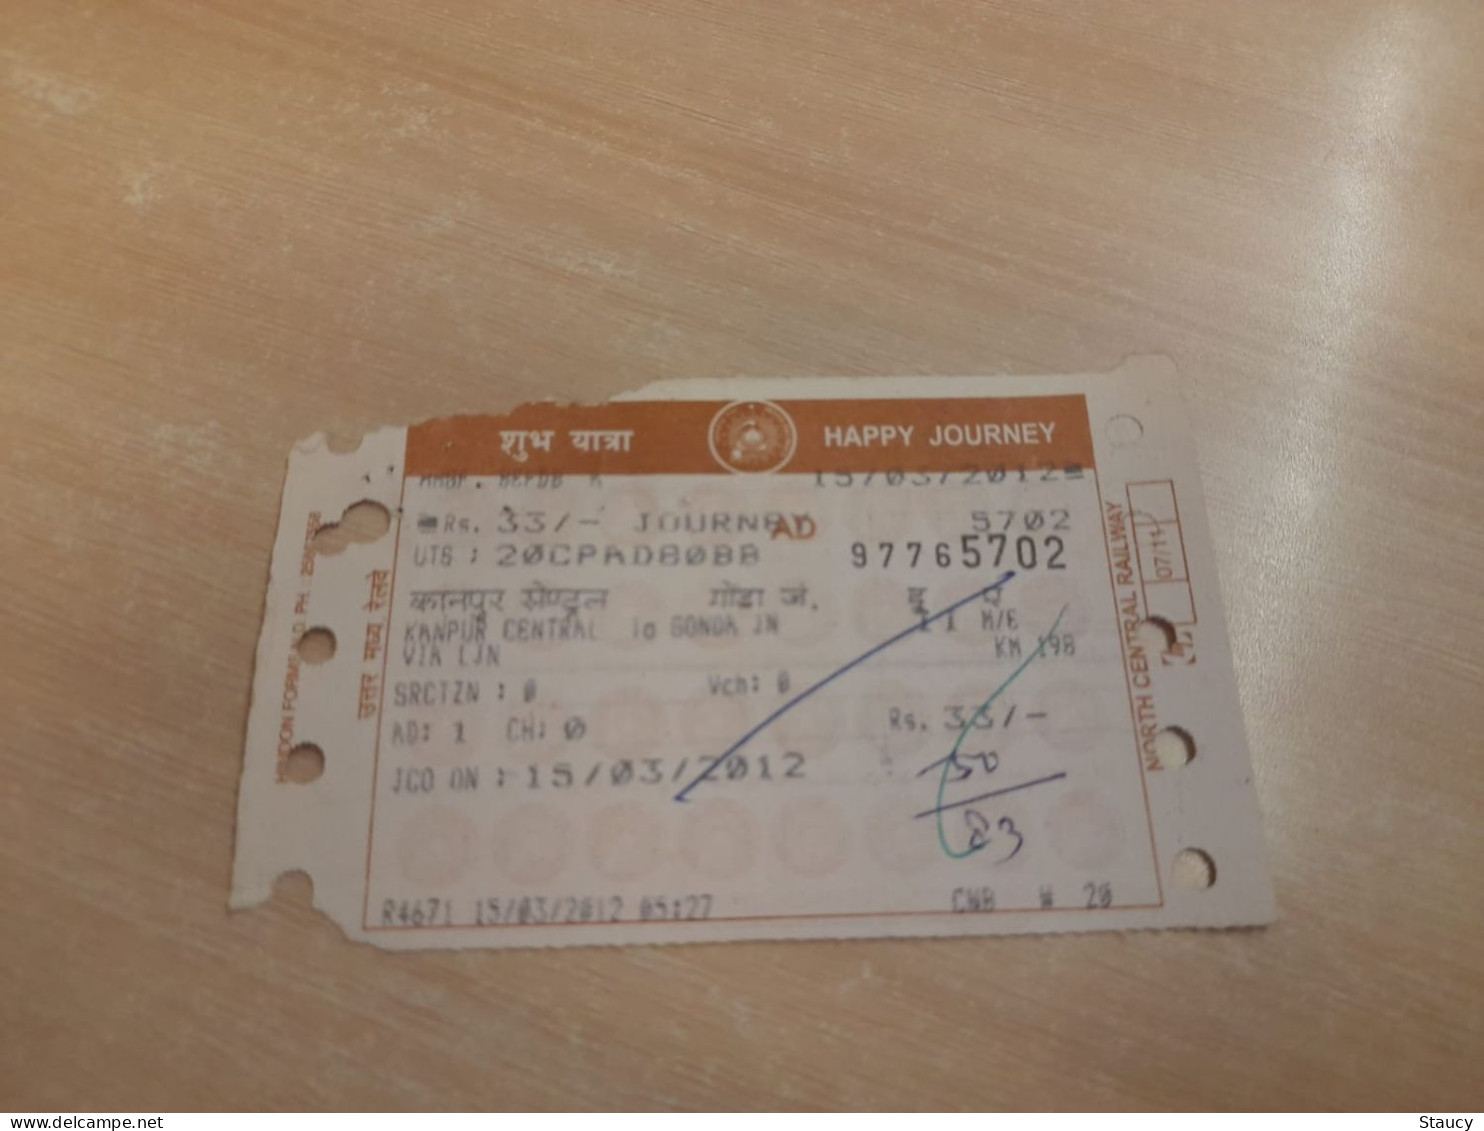 India Old / Vintage - Railway / Train Ticket "NORTH CENTRAL RAILWAY" As Per Scan - World